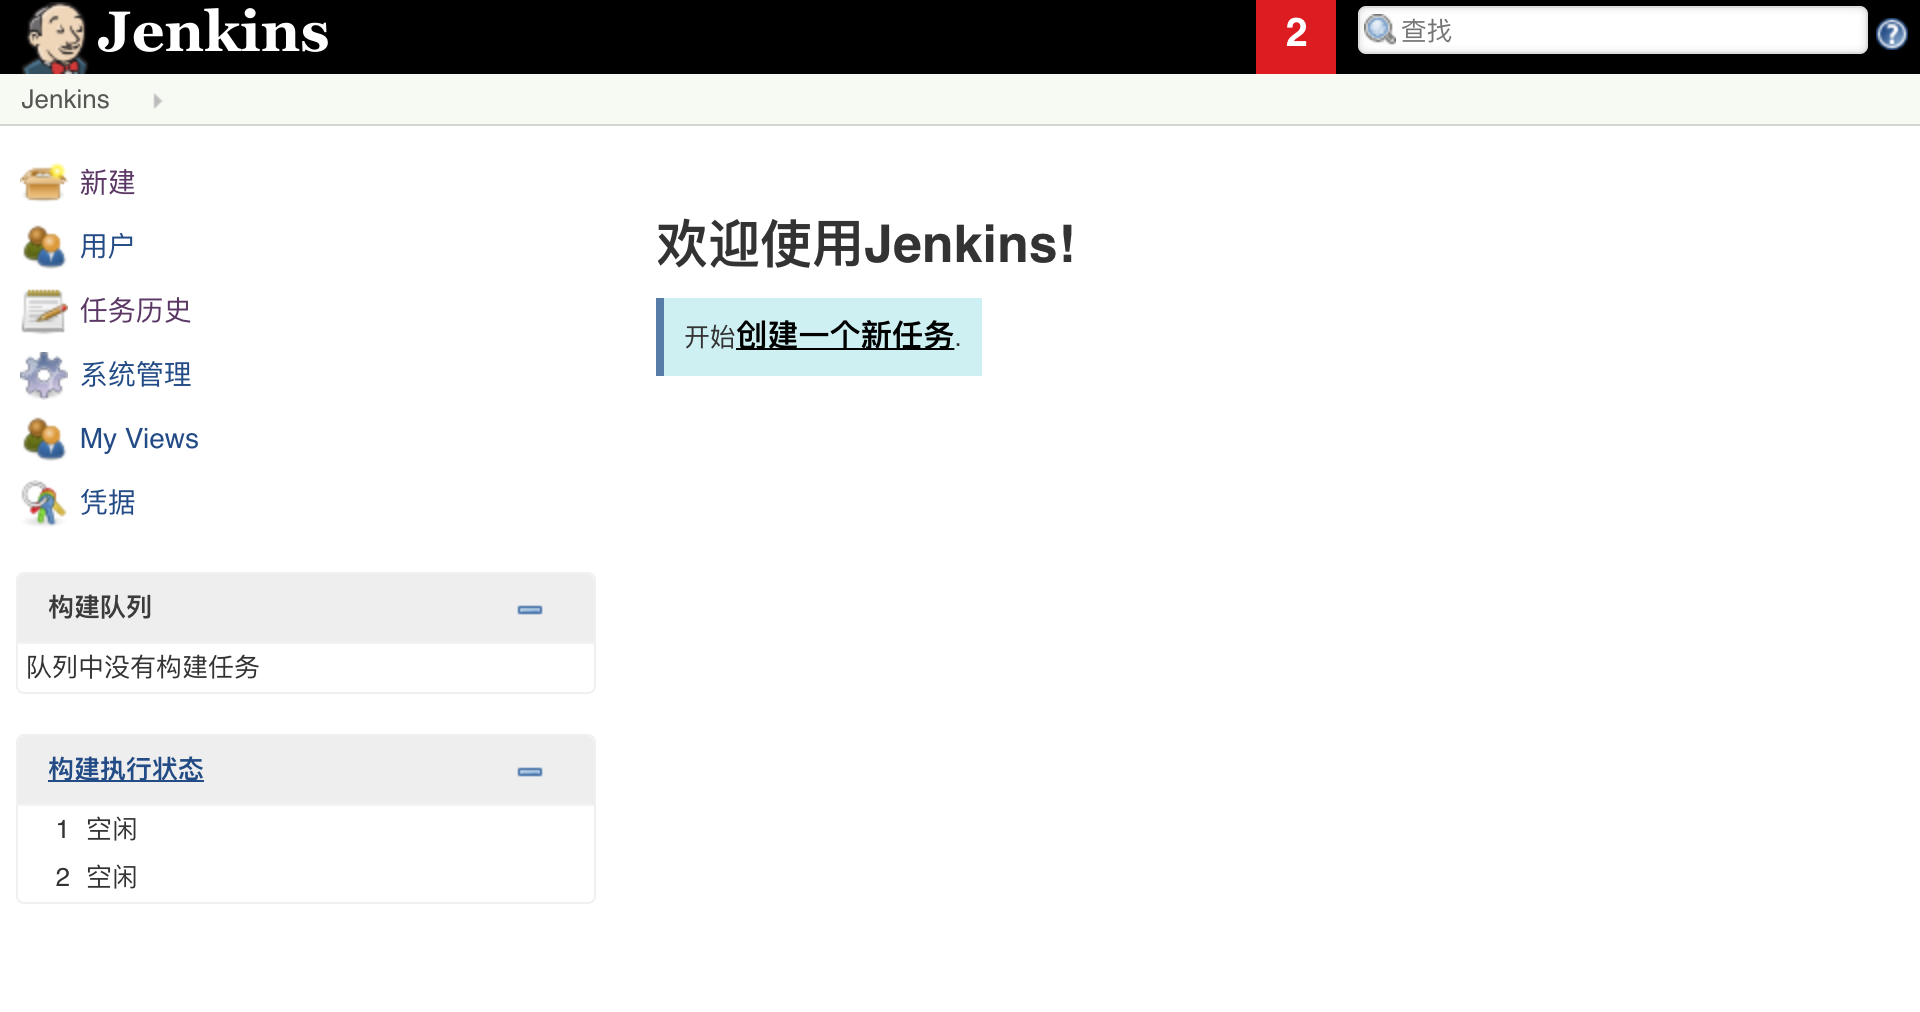 res/jenkins_new_project.png